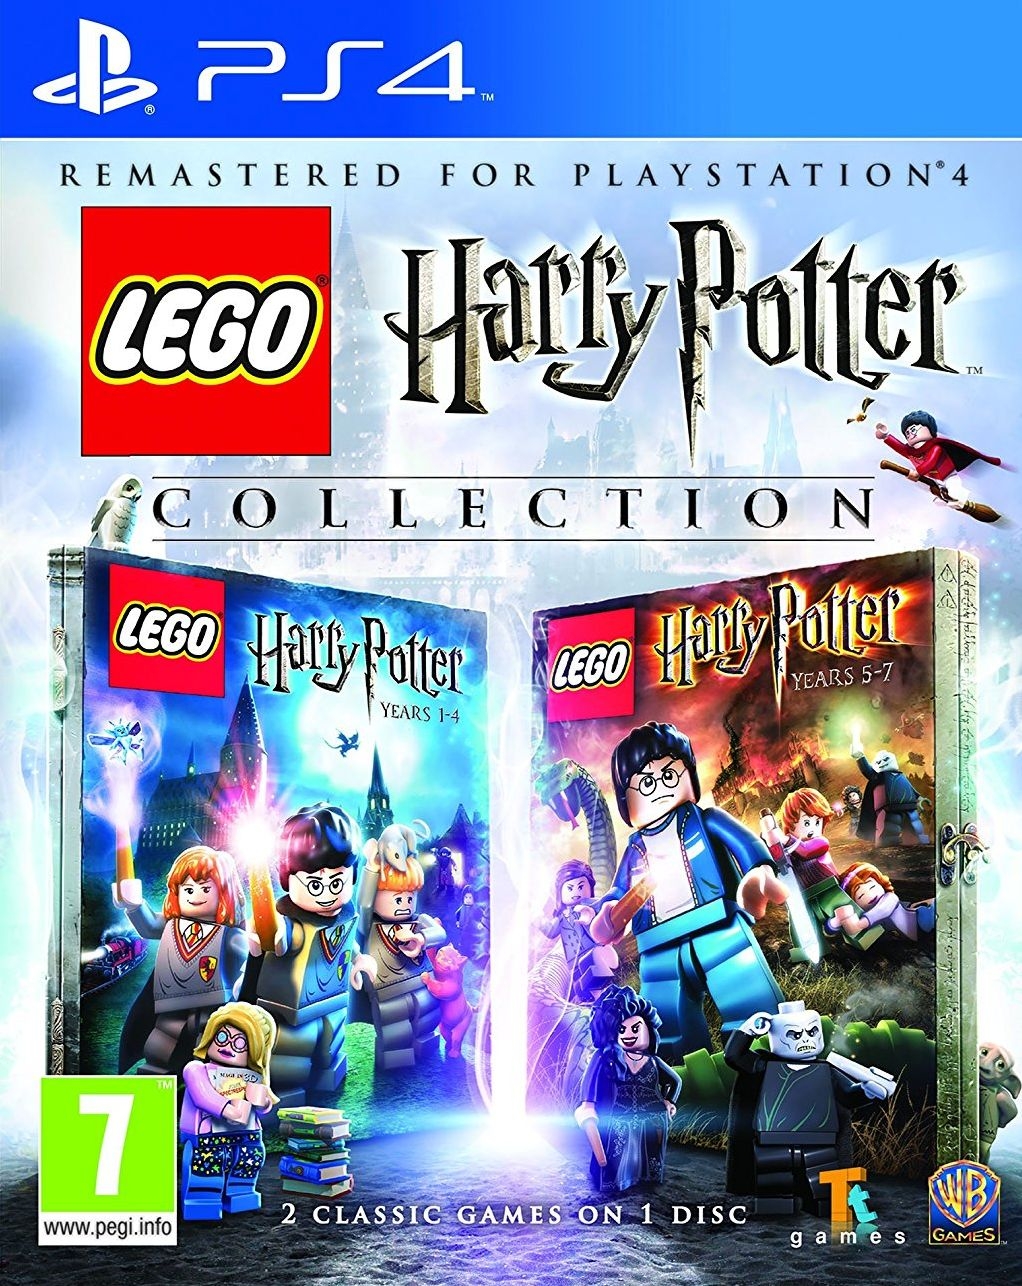 PS4 LEGO Harry Potter Collection (Harry Potter Years 1-4 & 5-7)